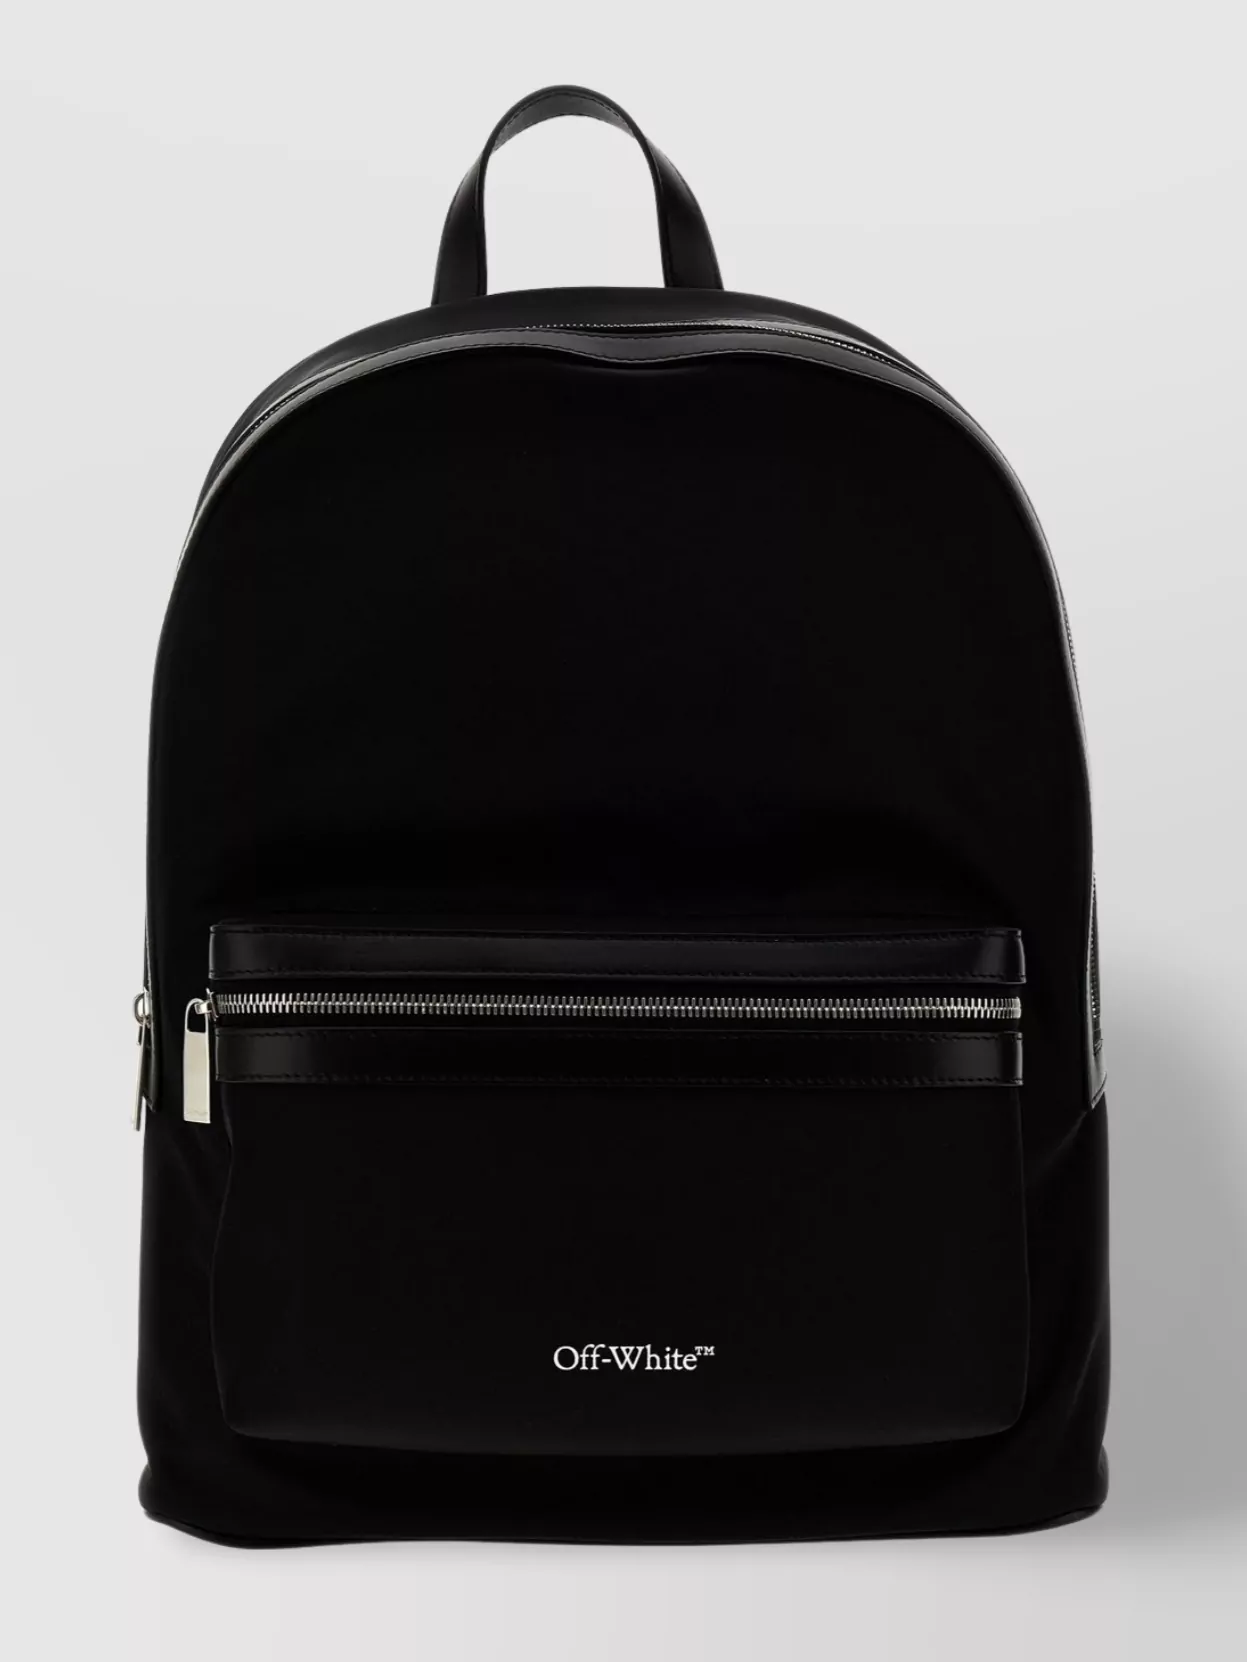 OFF-WHITE 'BACKPACK CORE ROUND' ADJUSTABLE STRAPS